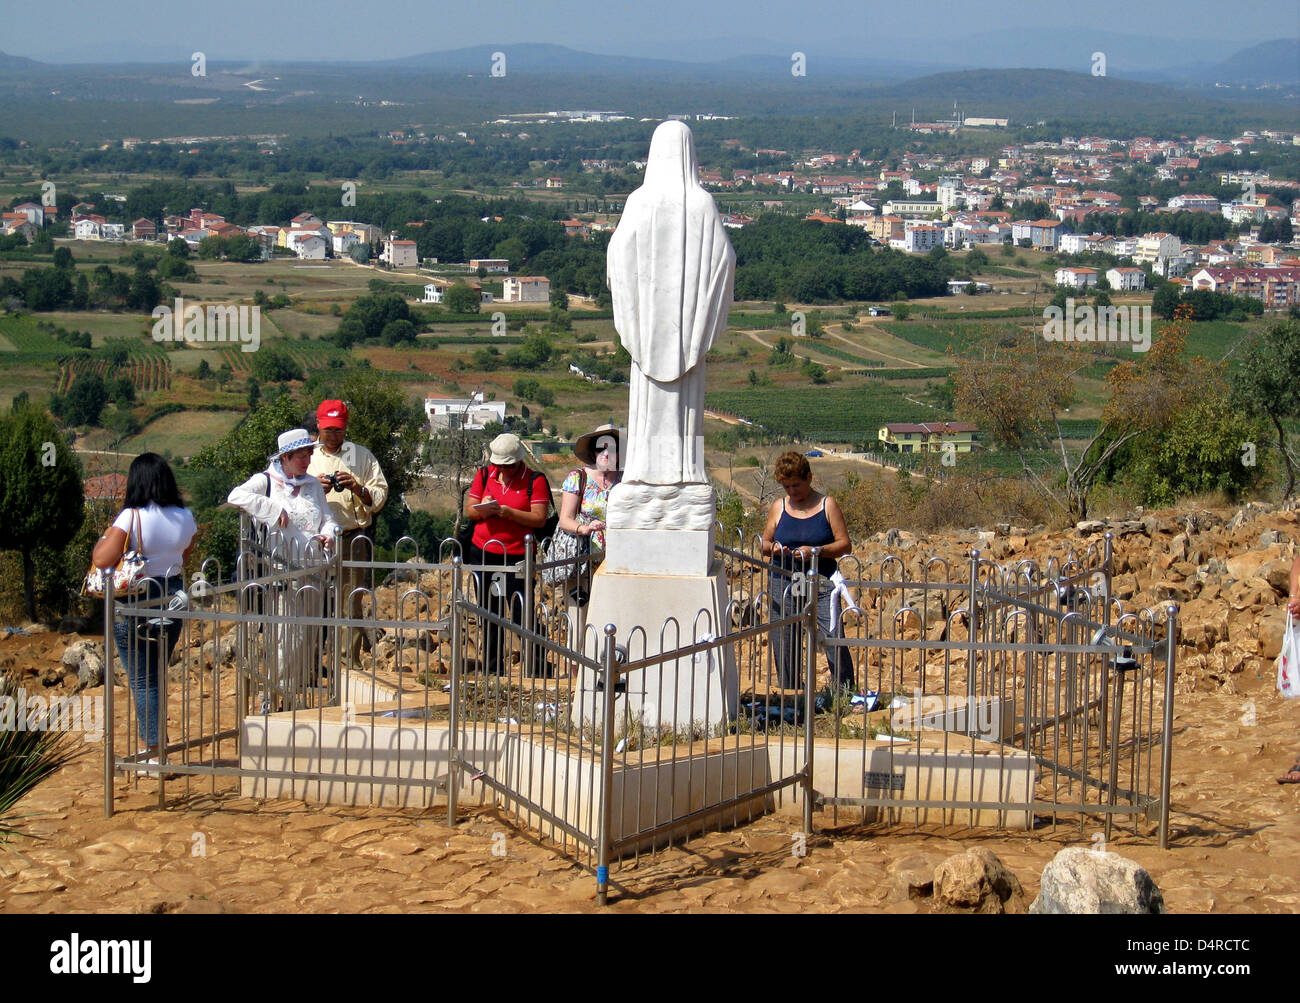 (dpa file) A file picture dated 05 September 2008 depicts a scuplture of Virgin Mary overseeing the area around pilgrimage site Medjugorje, Bosnia-Hercegovina. Virgin Mary is said to have appeared the first time here on 25 June 1981 to youths and is since then a magnet for Christian faithfuls. Medjugorje is located in the Hercegovina that is mostly populated by Croatians. Photo: Ro Stock Photo